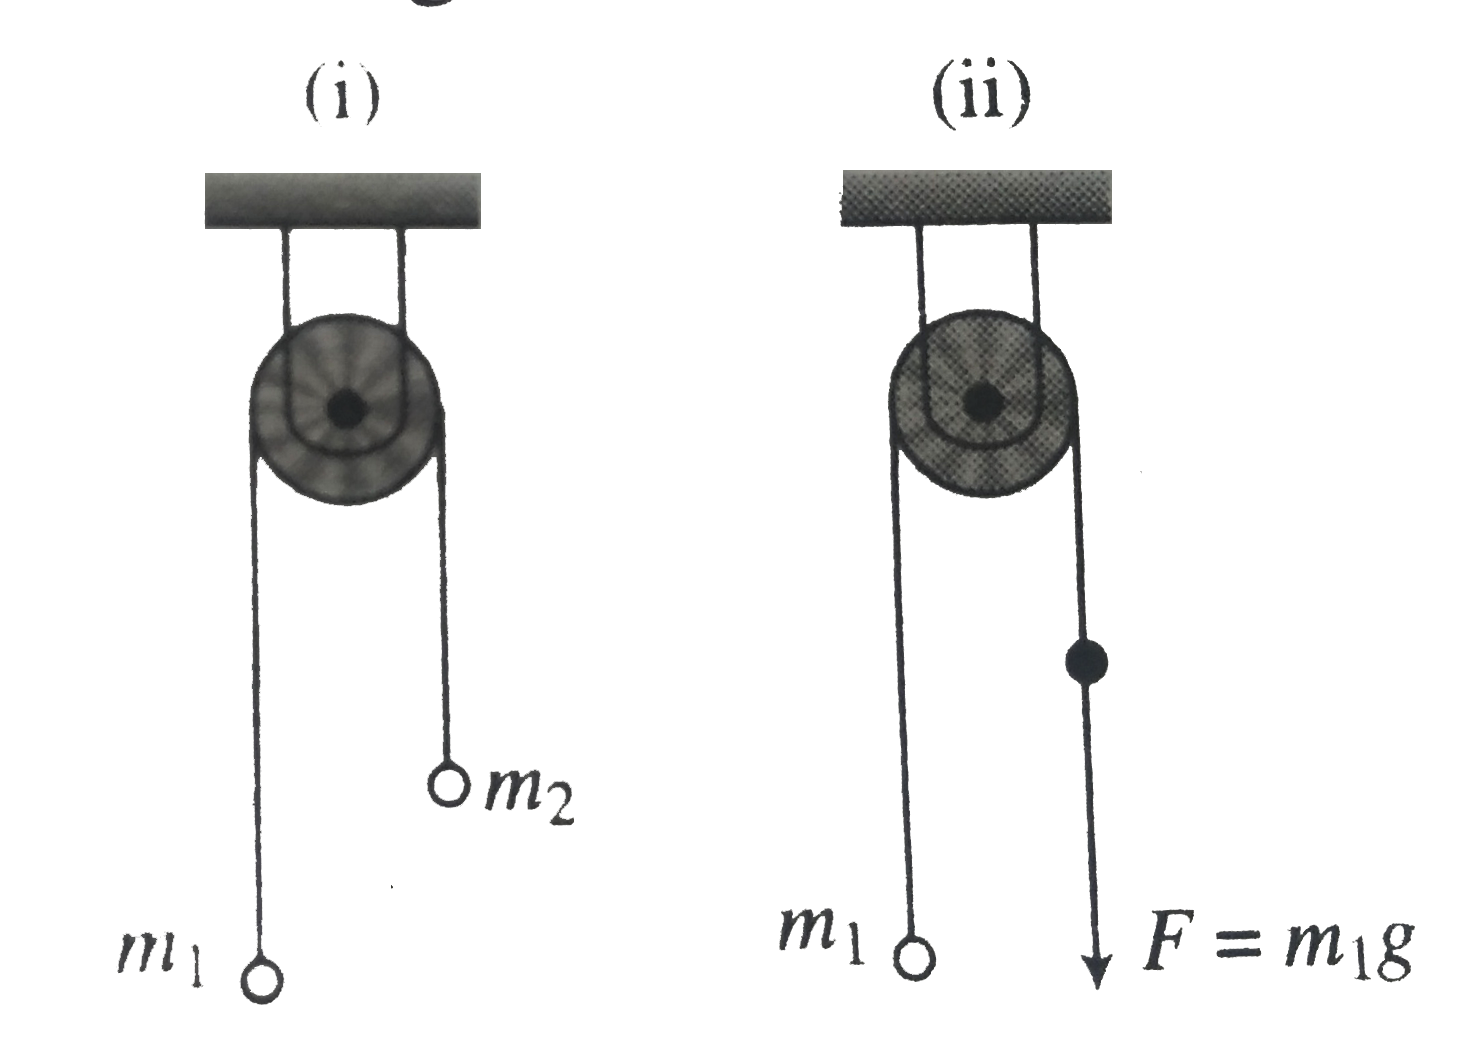 In two pulley-paricle systems (i) and (ii) , the acceleration and force imparted by the string on the pulley and tension in the strings are (a(1) ,a(2)), (N(1),N(2)) and (T(1),(T(2)), respectively . Ignoring friction in all contacting surfaces, study the following statements:       (a) (a1)/(a2)=1   (b) (T1)/(T2)lt1   (c)(N1)/(N2)gt1   (d) (a1)/(a2)lt1   Now mark the correct answer: